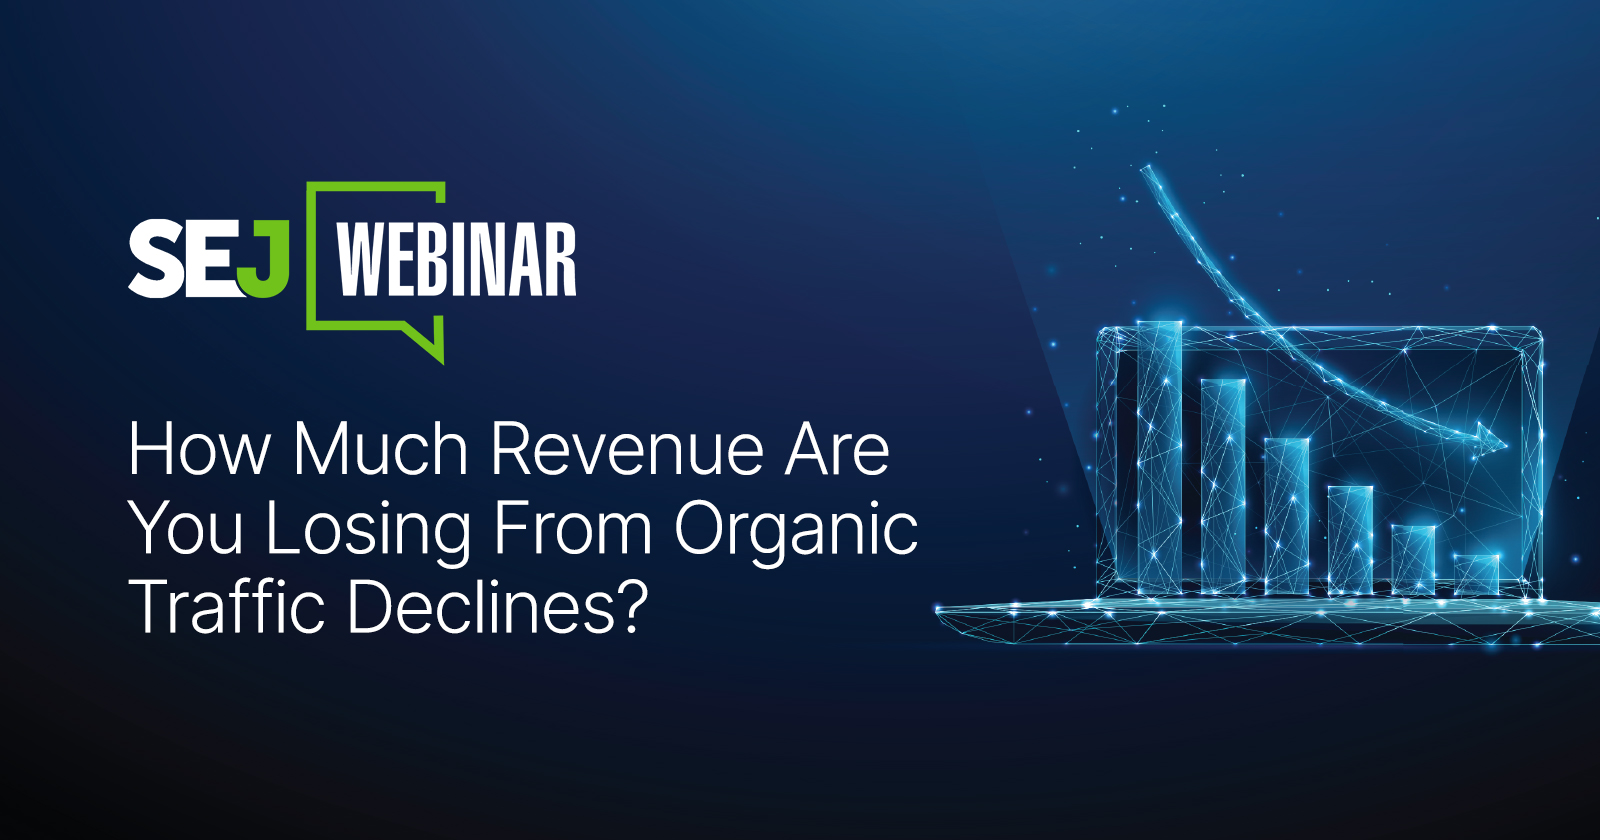 How Much Revenue Are You Losing From Organic Traffic Declines? via @sejournal, @hethr_campbell